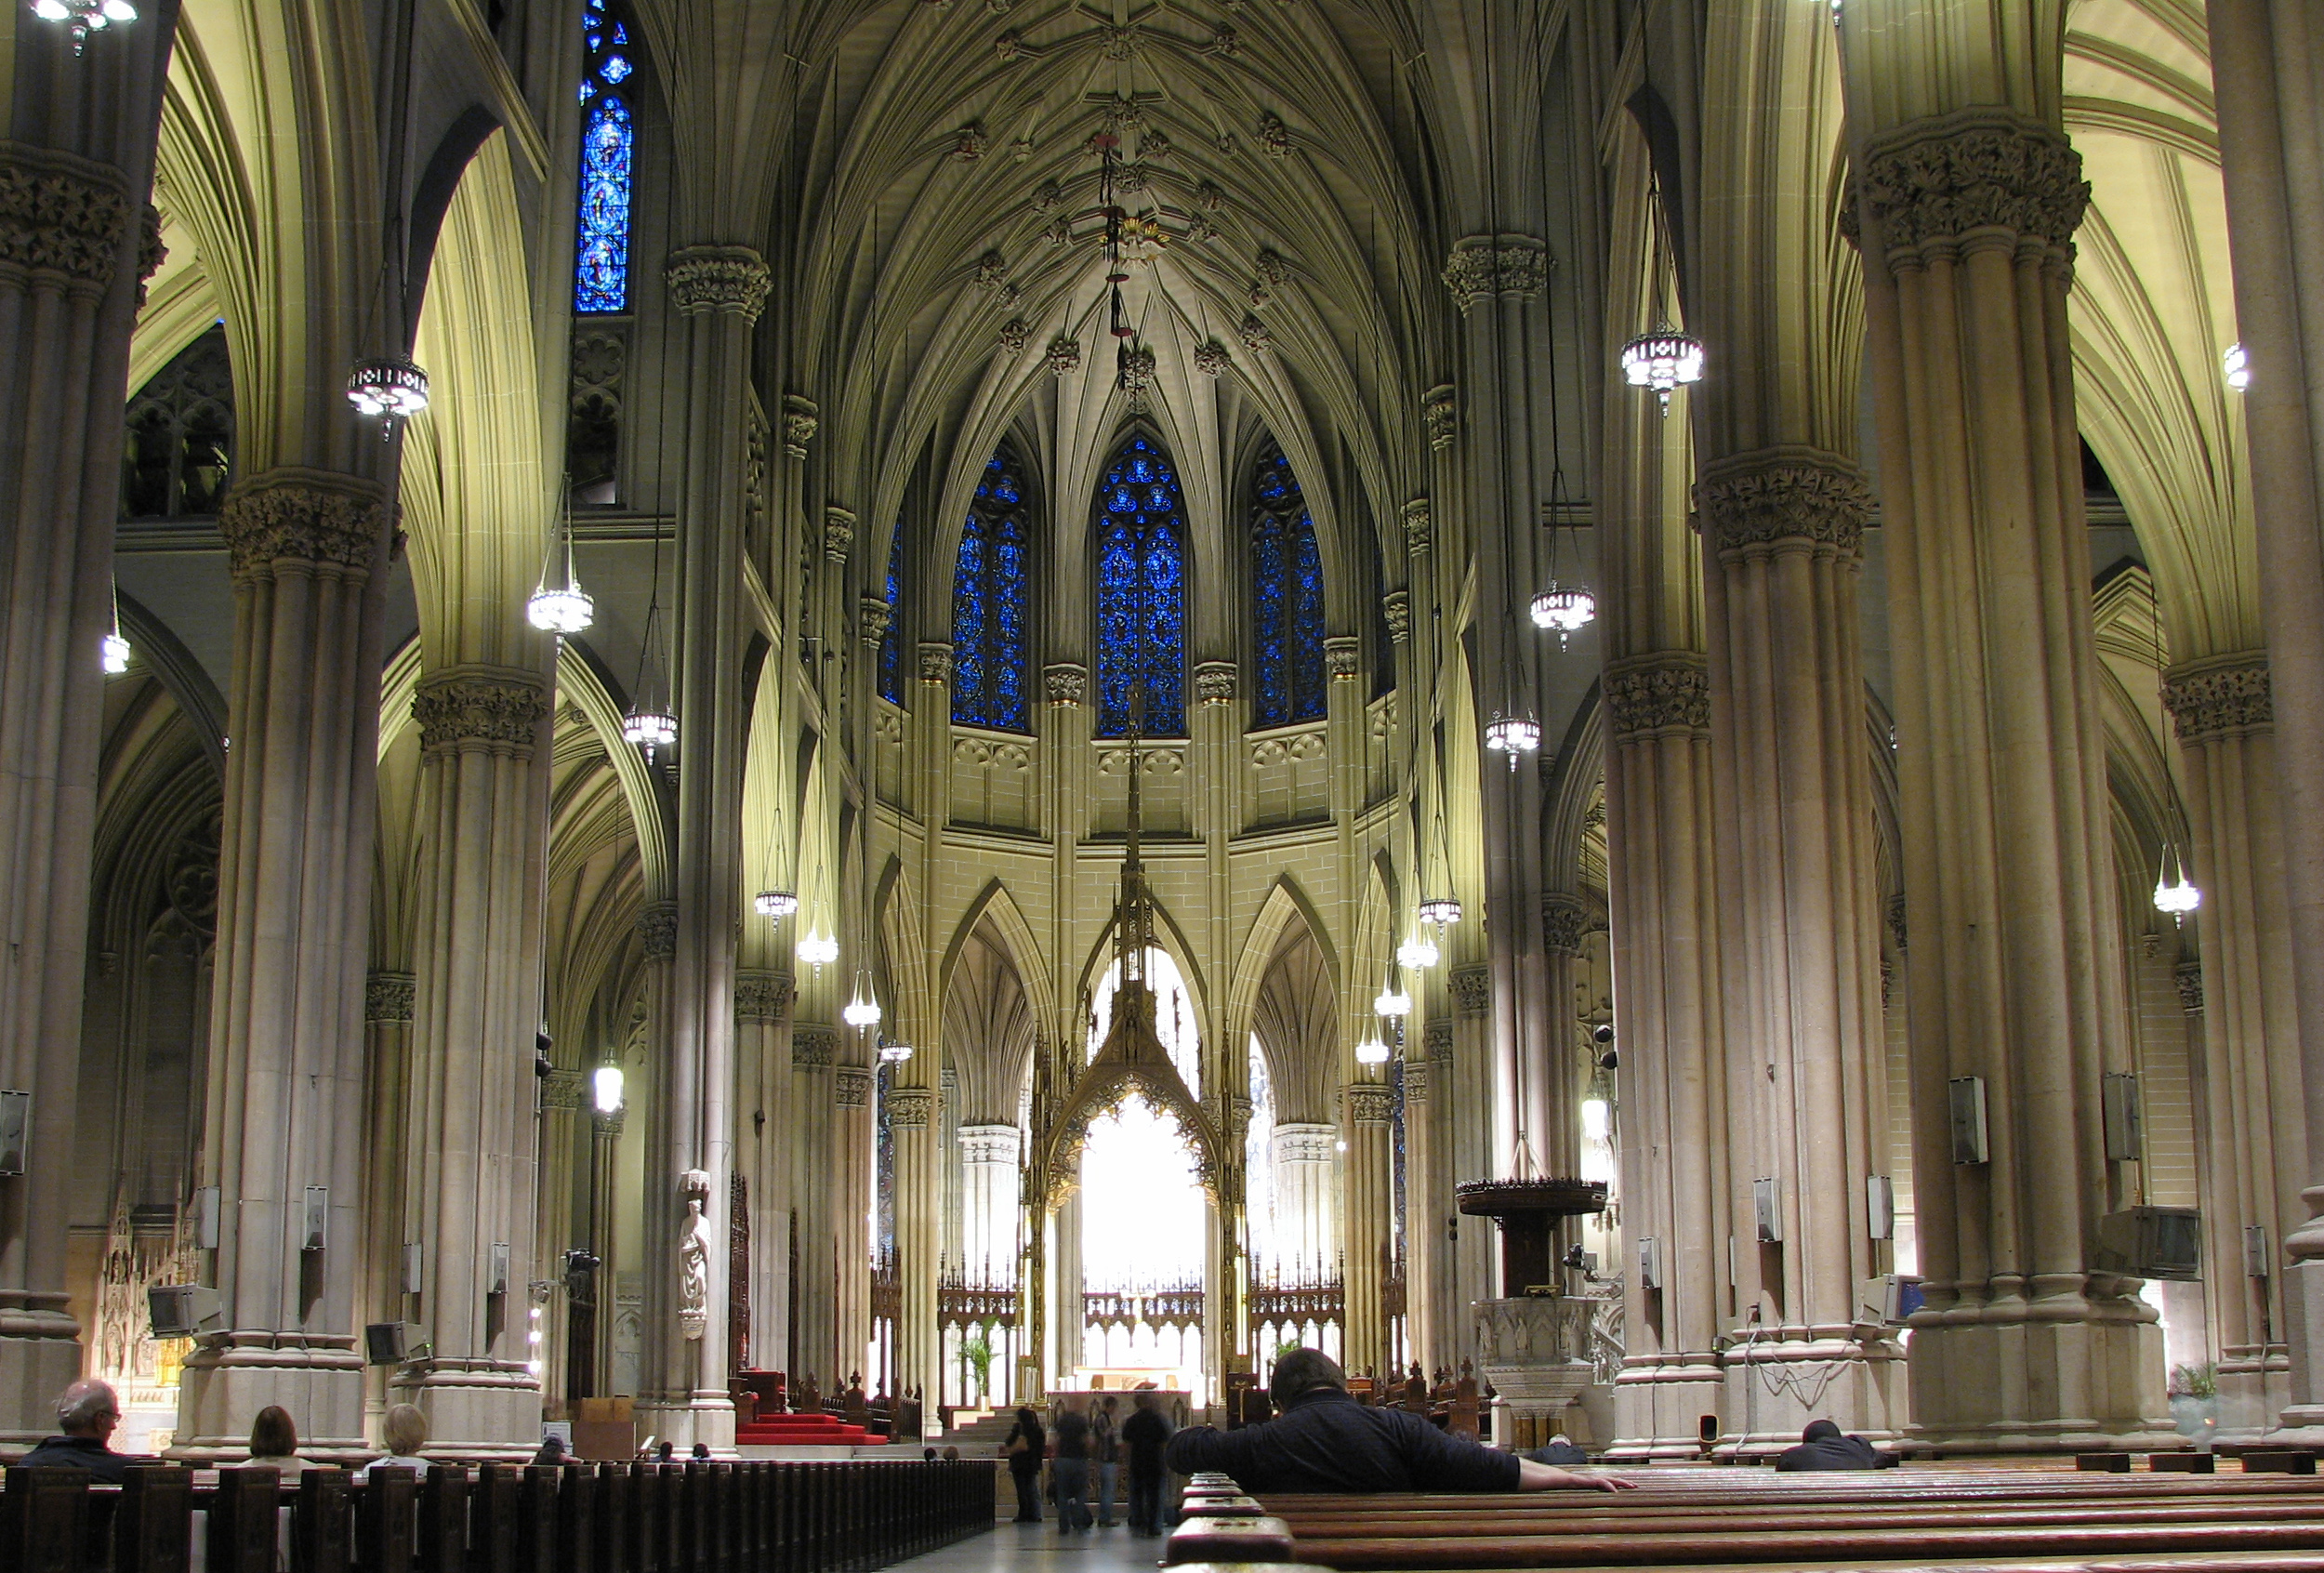 File:St Patrick's cathedral NY.jpg - Wikimedia Commons